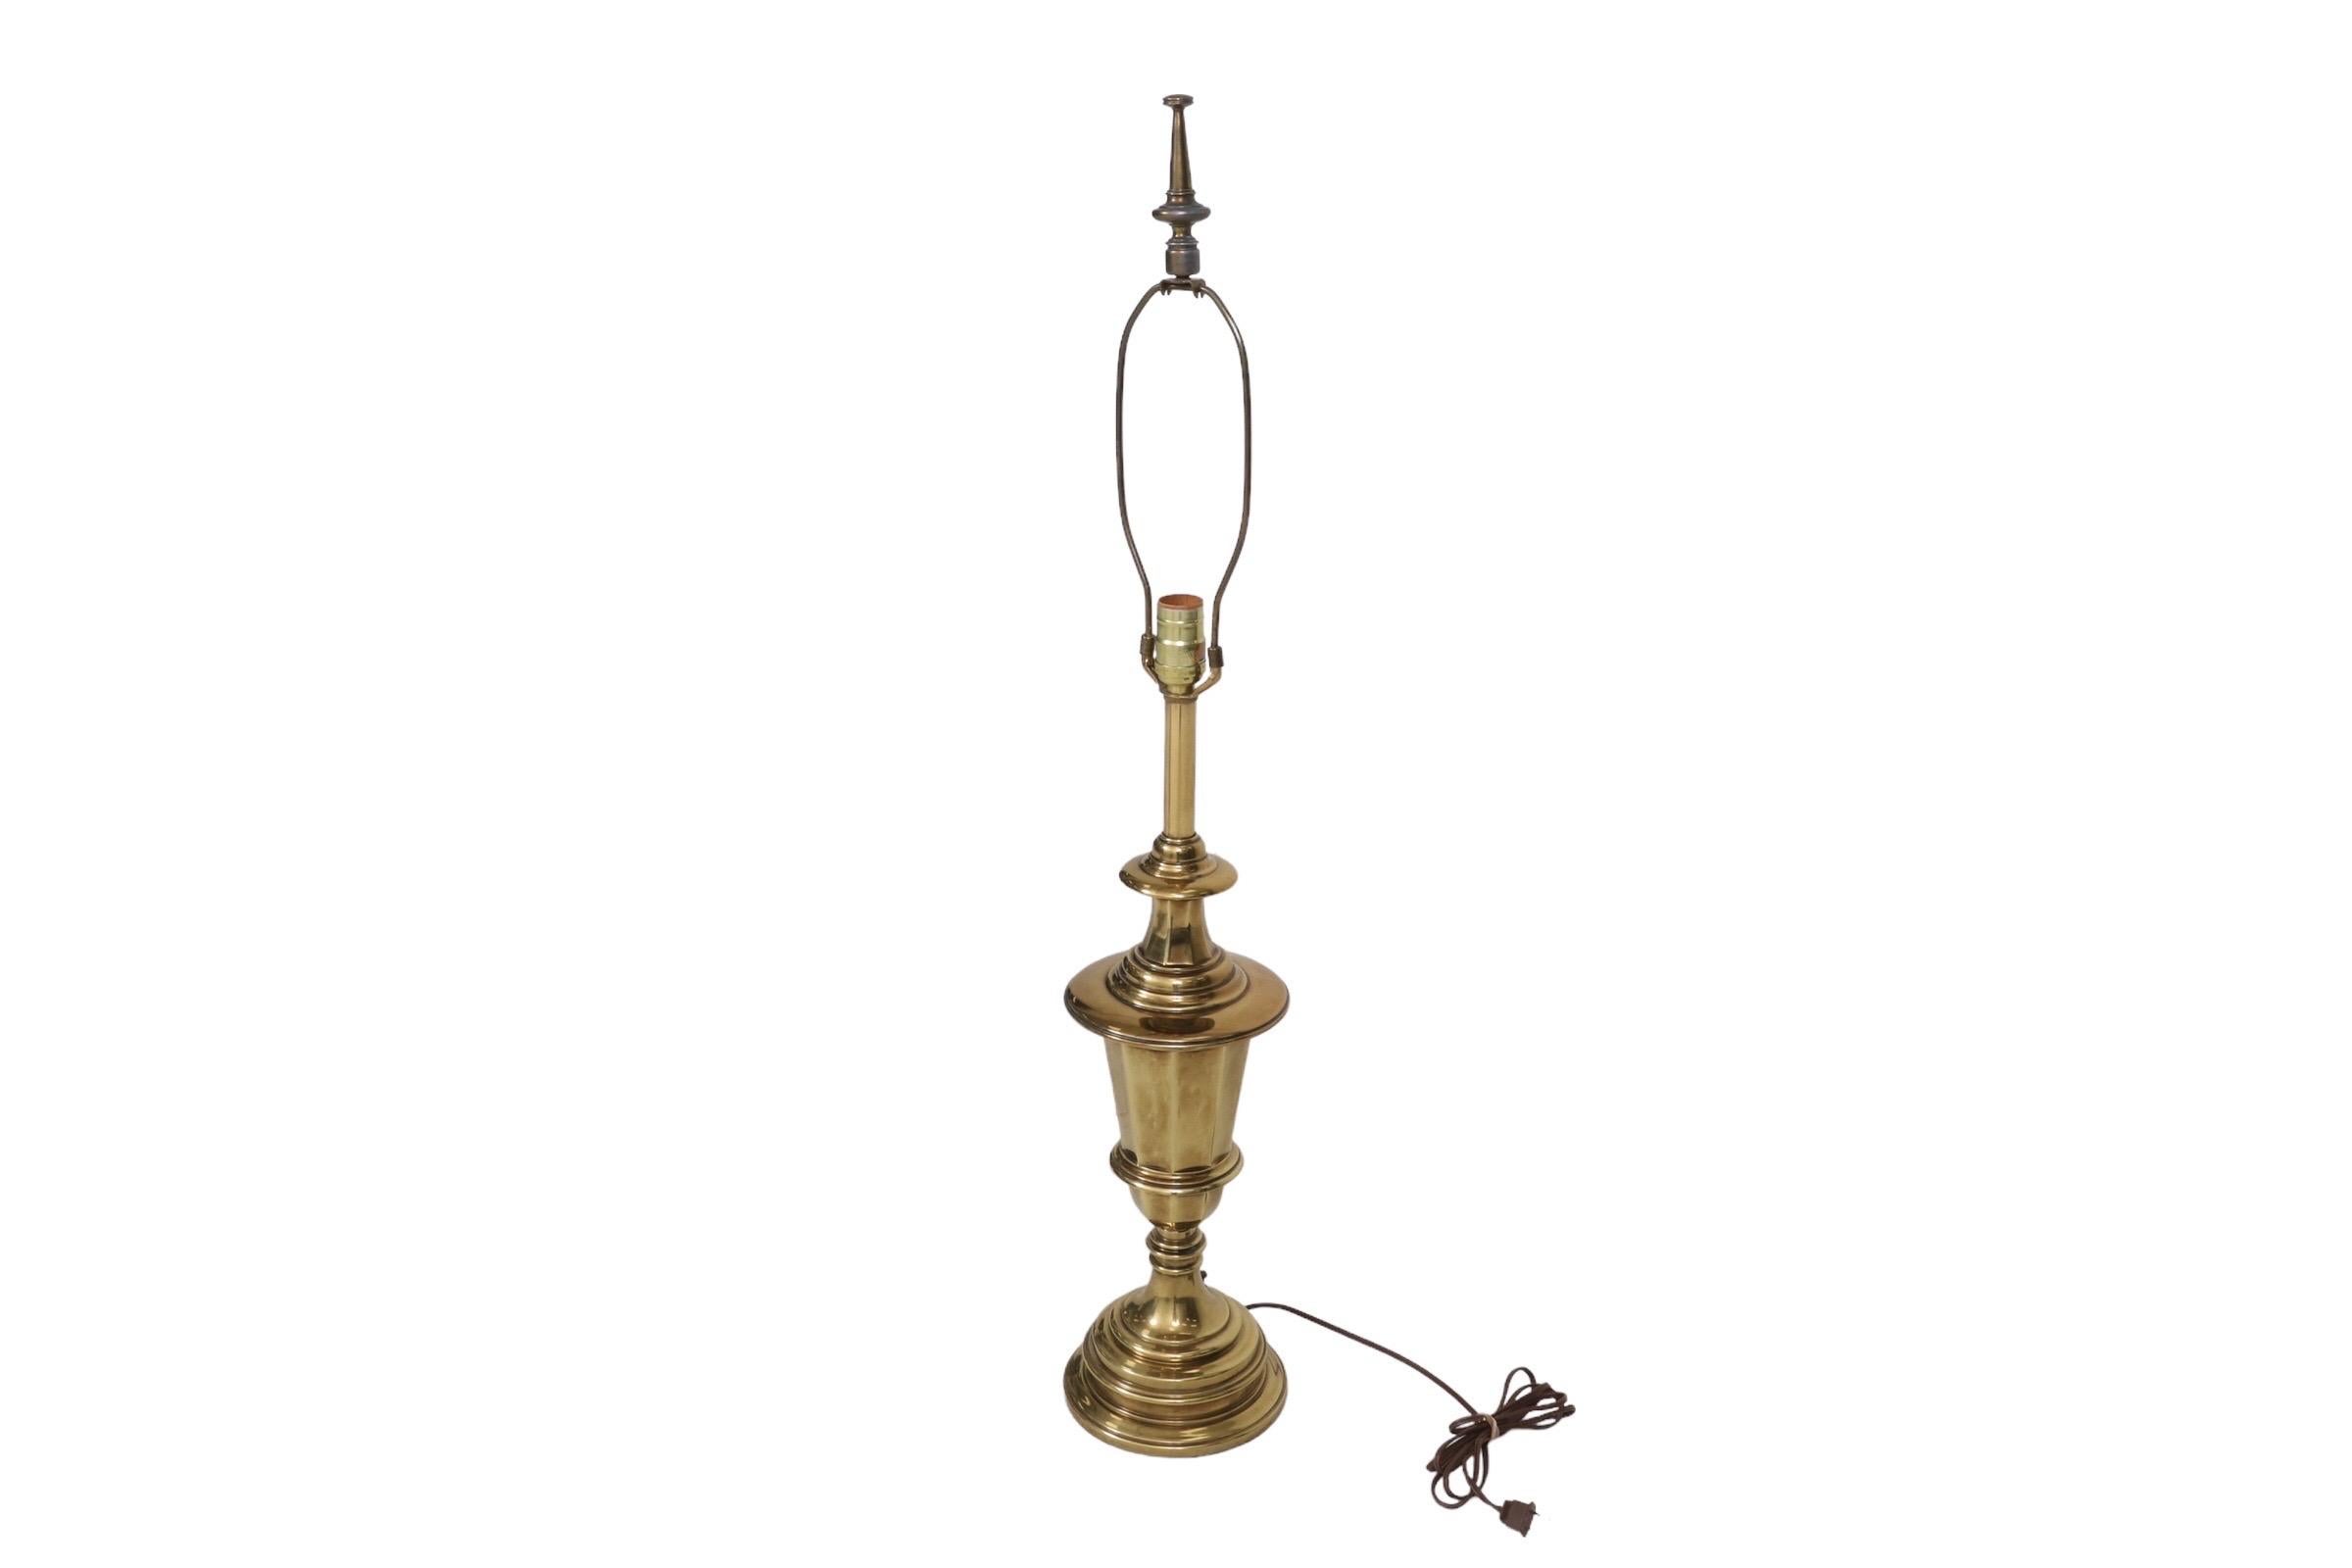 A turned brass table lamp made by Stiffel. A turned central column, above an octagonal angled vase, is mirrored with a round turned base. Topping the harp is a matching turned brass finial. The Stiffel maker's label can be seen on the socket. Wired